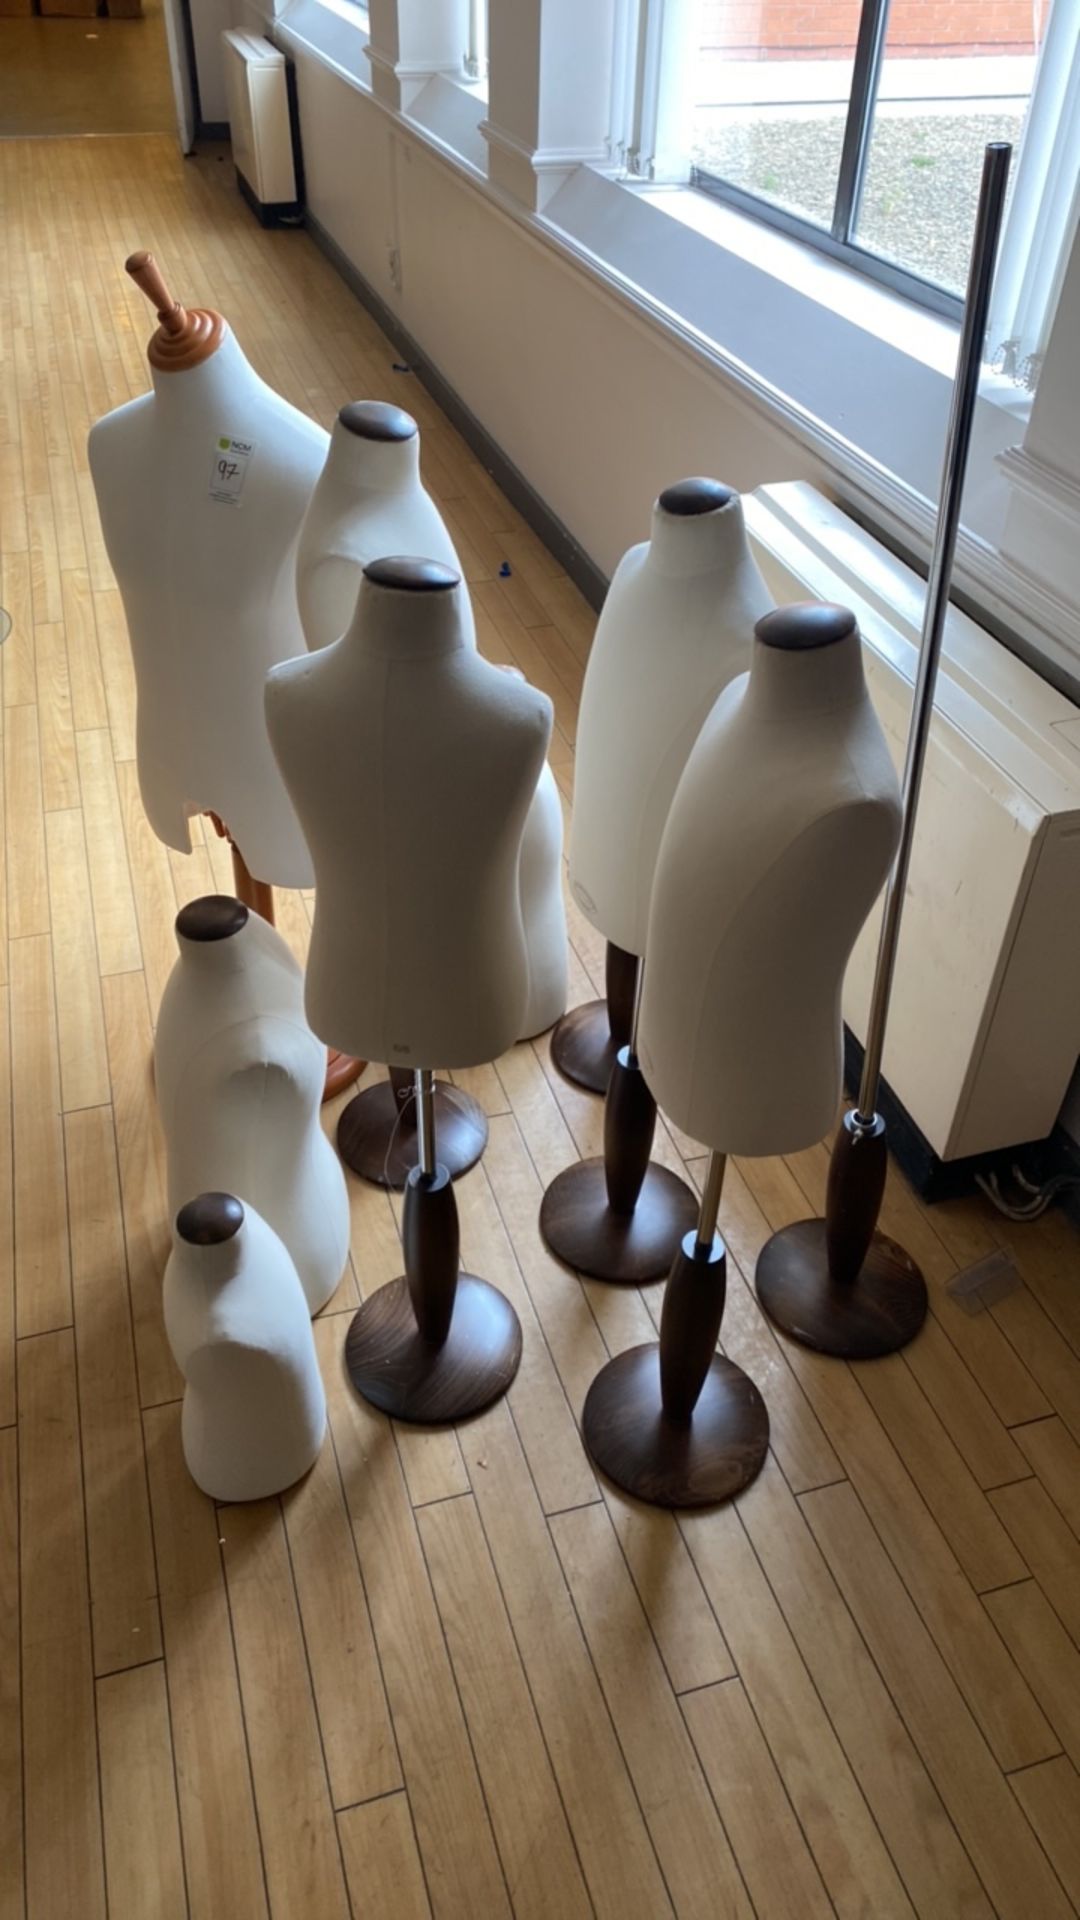 Assortment of Fabric Mannequin Busts - Image 2 of 3